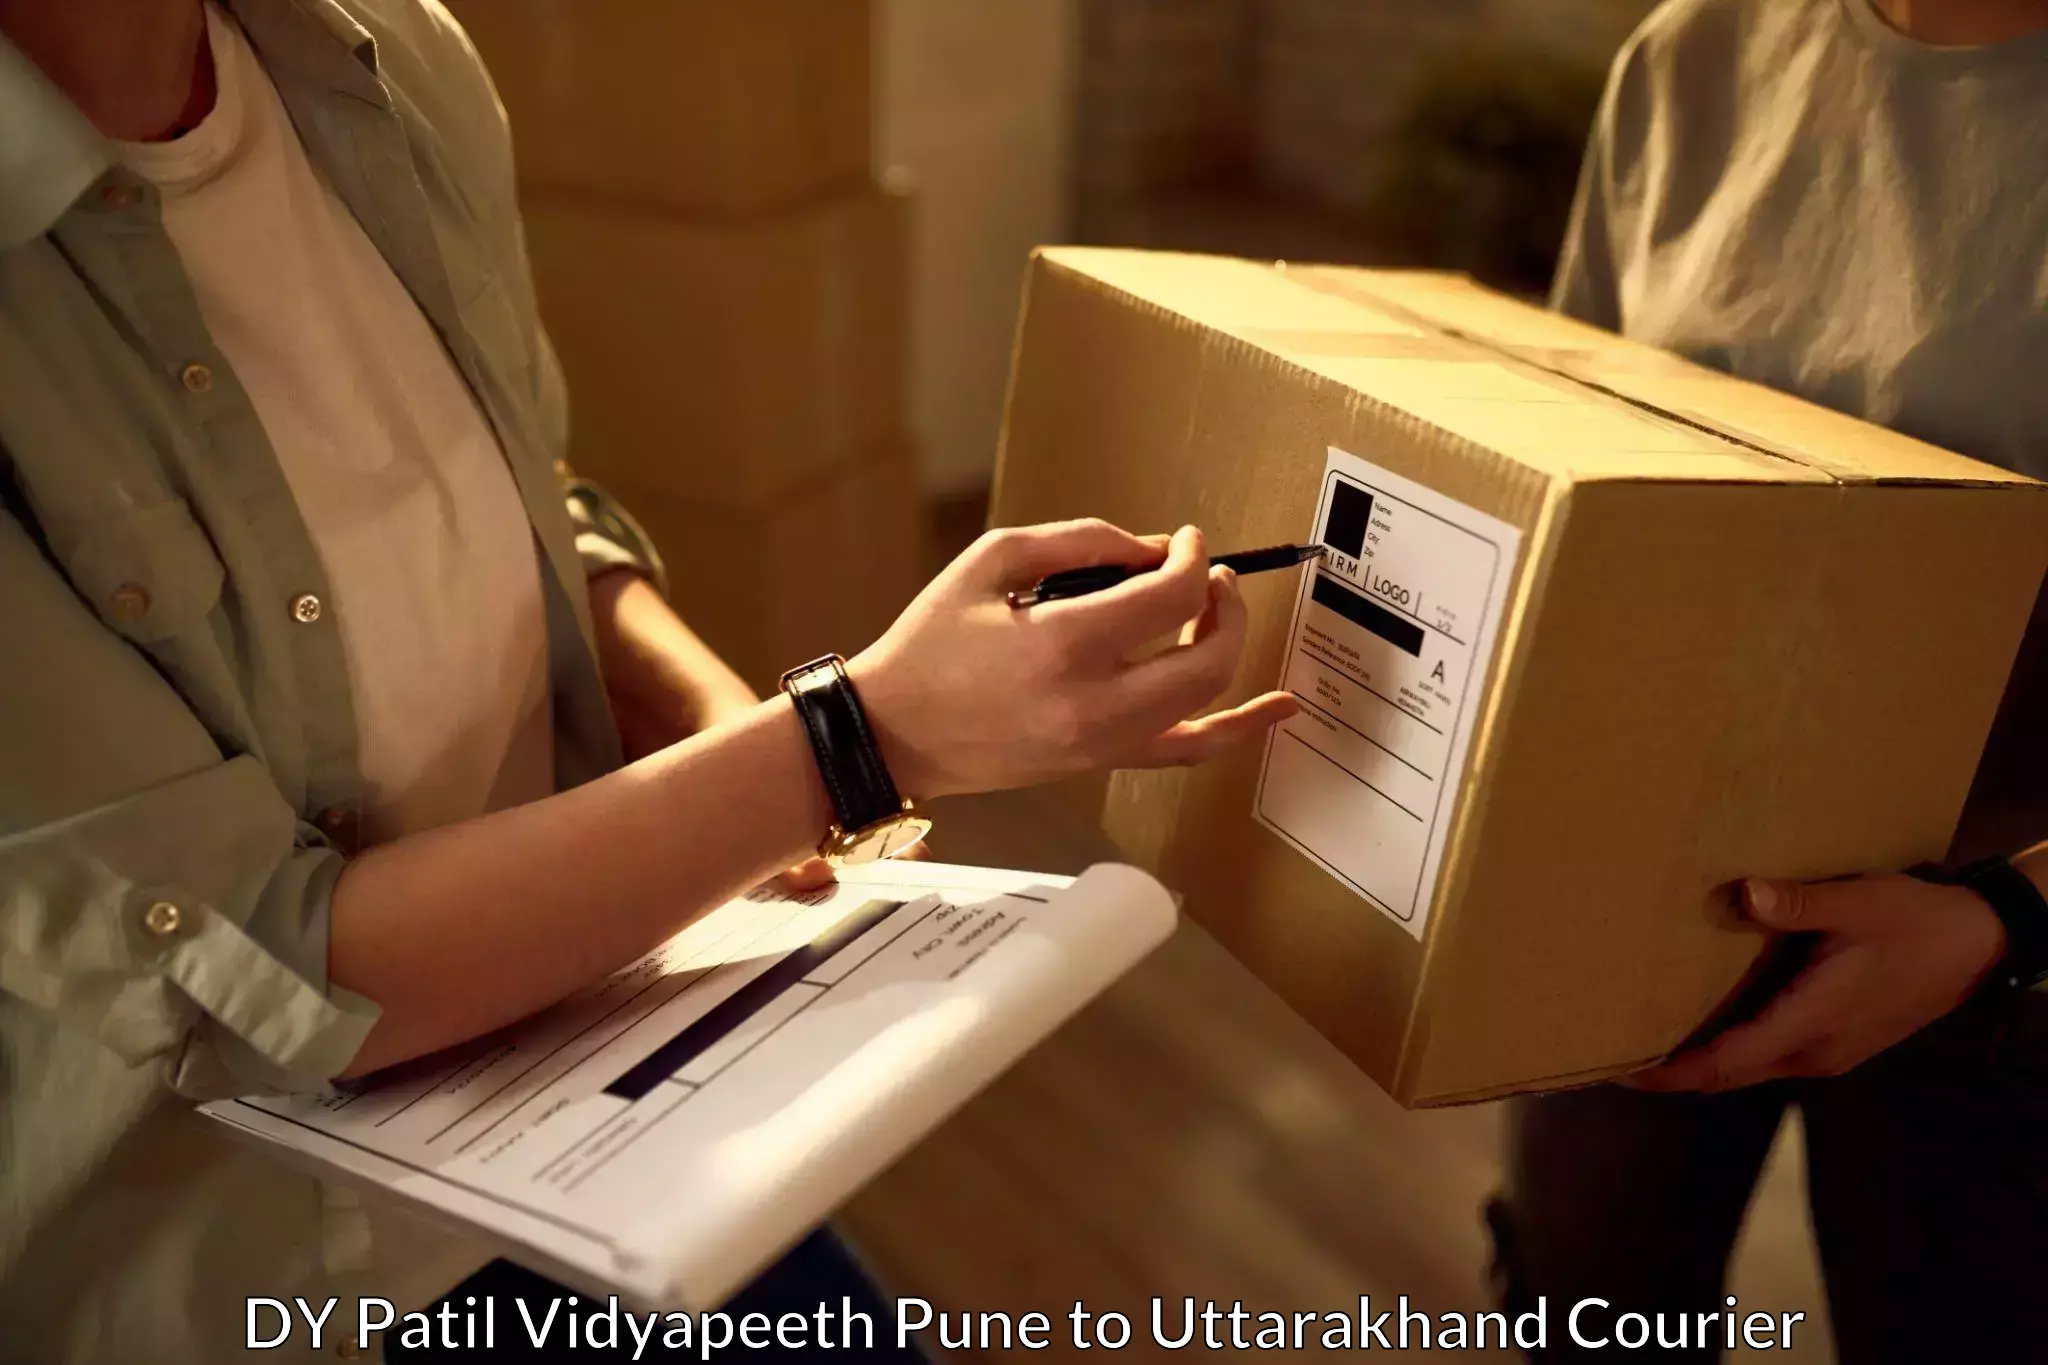 24-hour delivery options DY Patil Vidyapeeth Pune to Almora